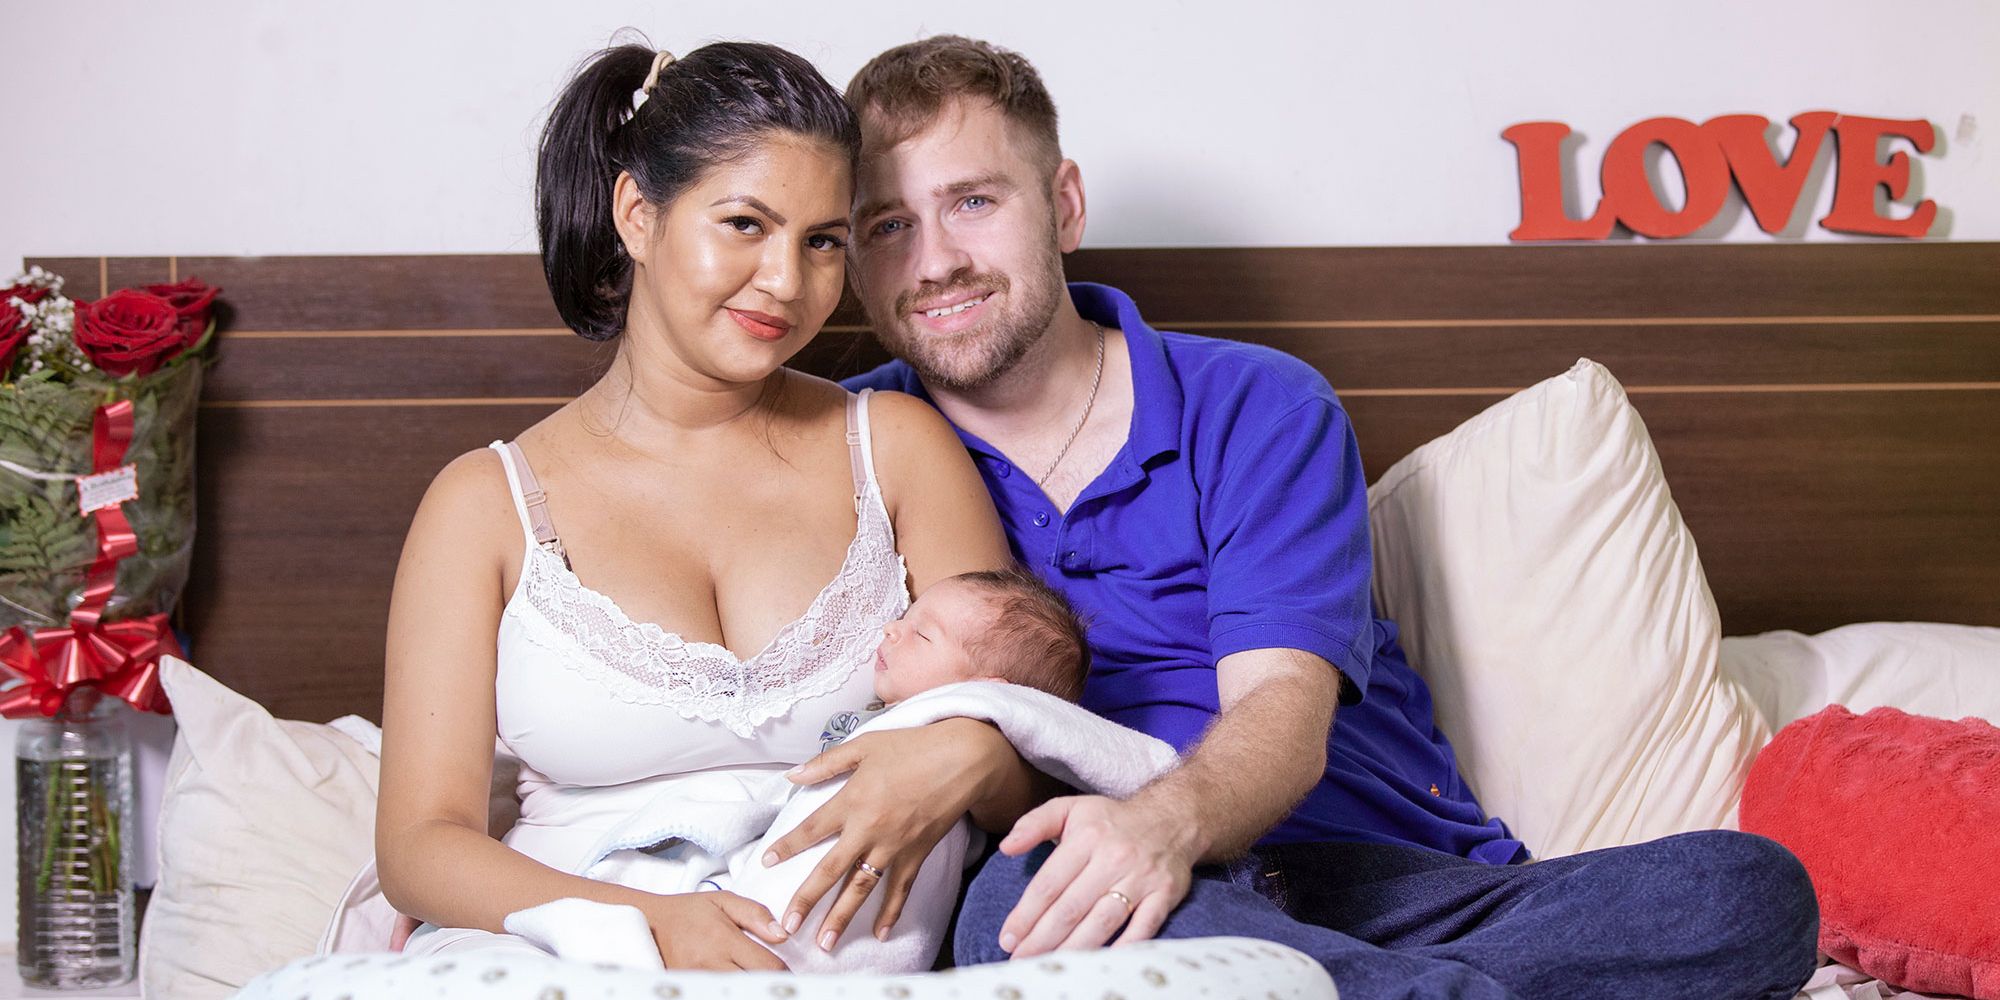 90 Day Fiance: Fans Find Cute Pic of Paul & Karine’s Sons Dangerous.